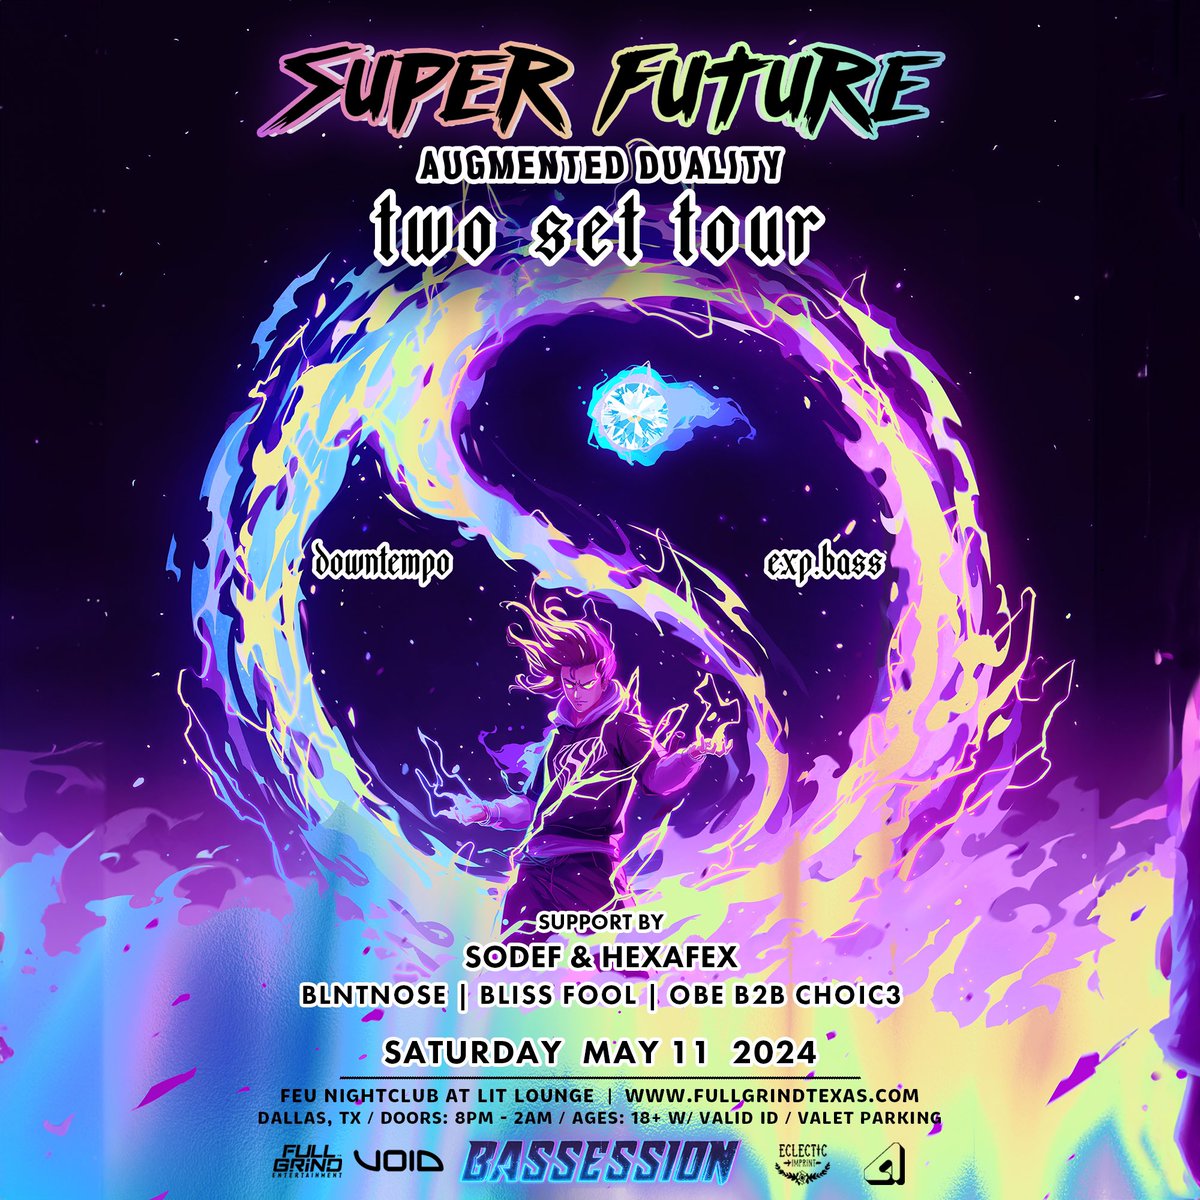 Super Future is this weekend! ✨💎✨ 5/10 — Houston at 9pm Music Venue 5/11 — Dallas at Feu Night at Lit Lounge